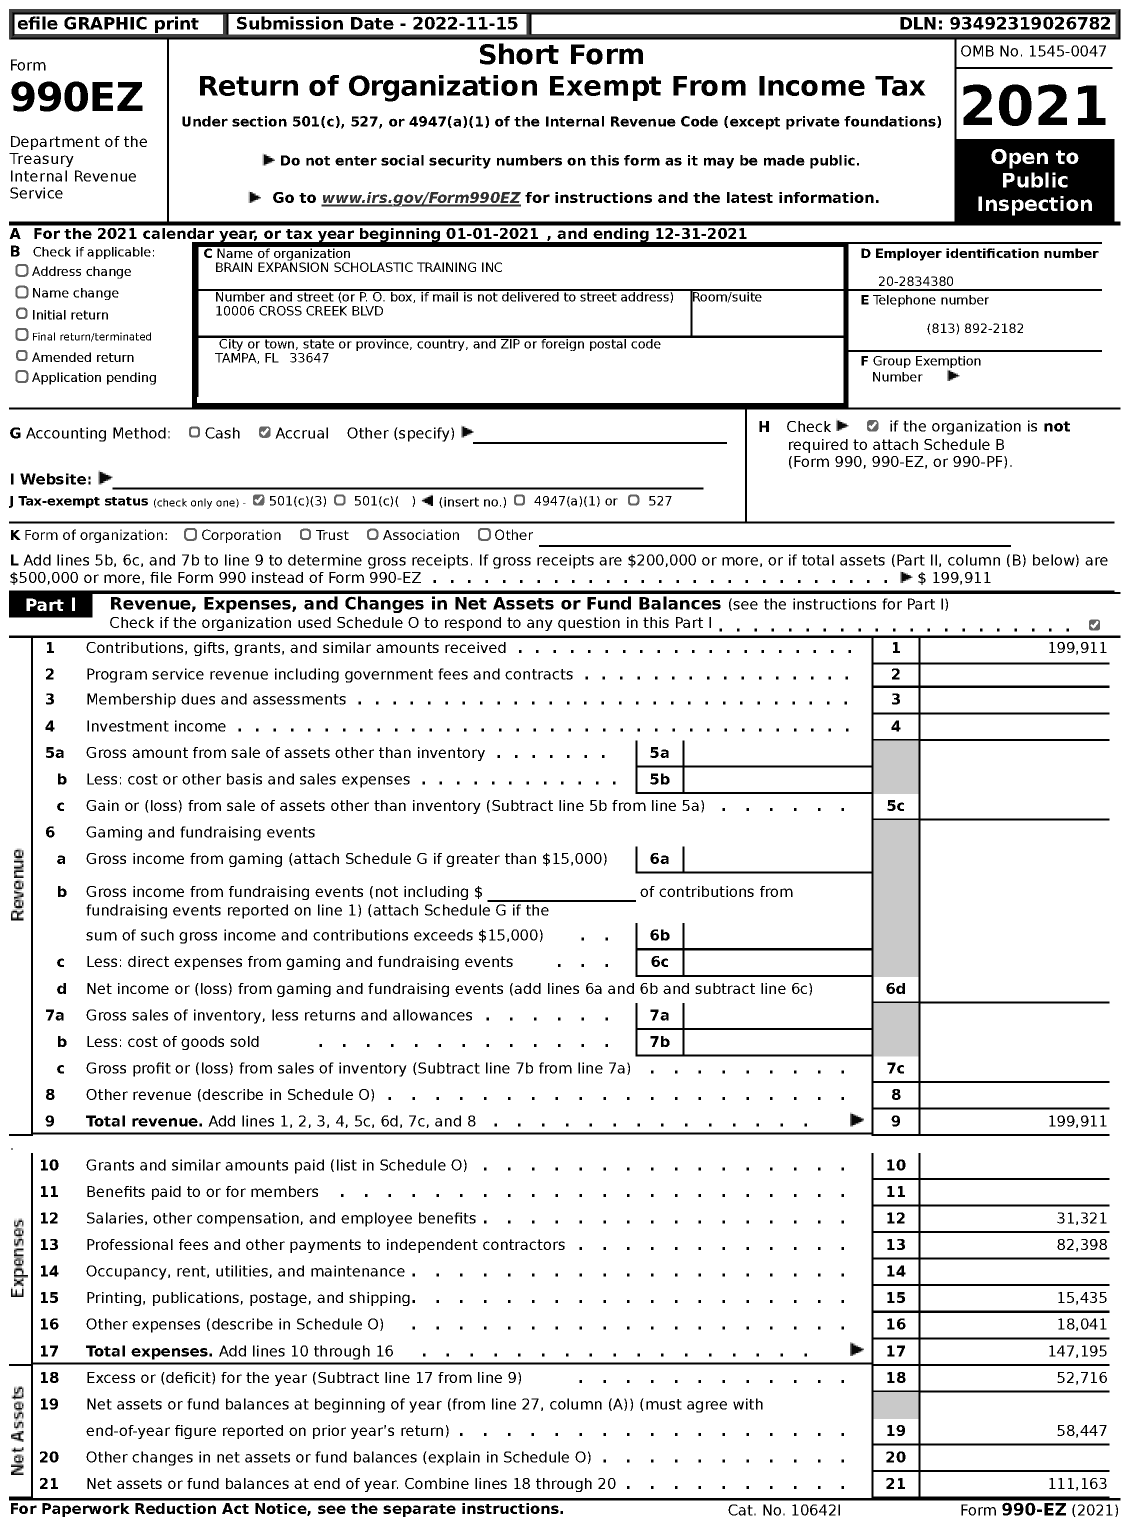 Image of first page of 2021 Form 990EZ for Brain Expansions Scholastic Training